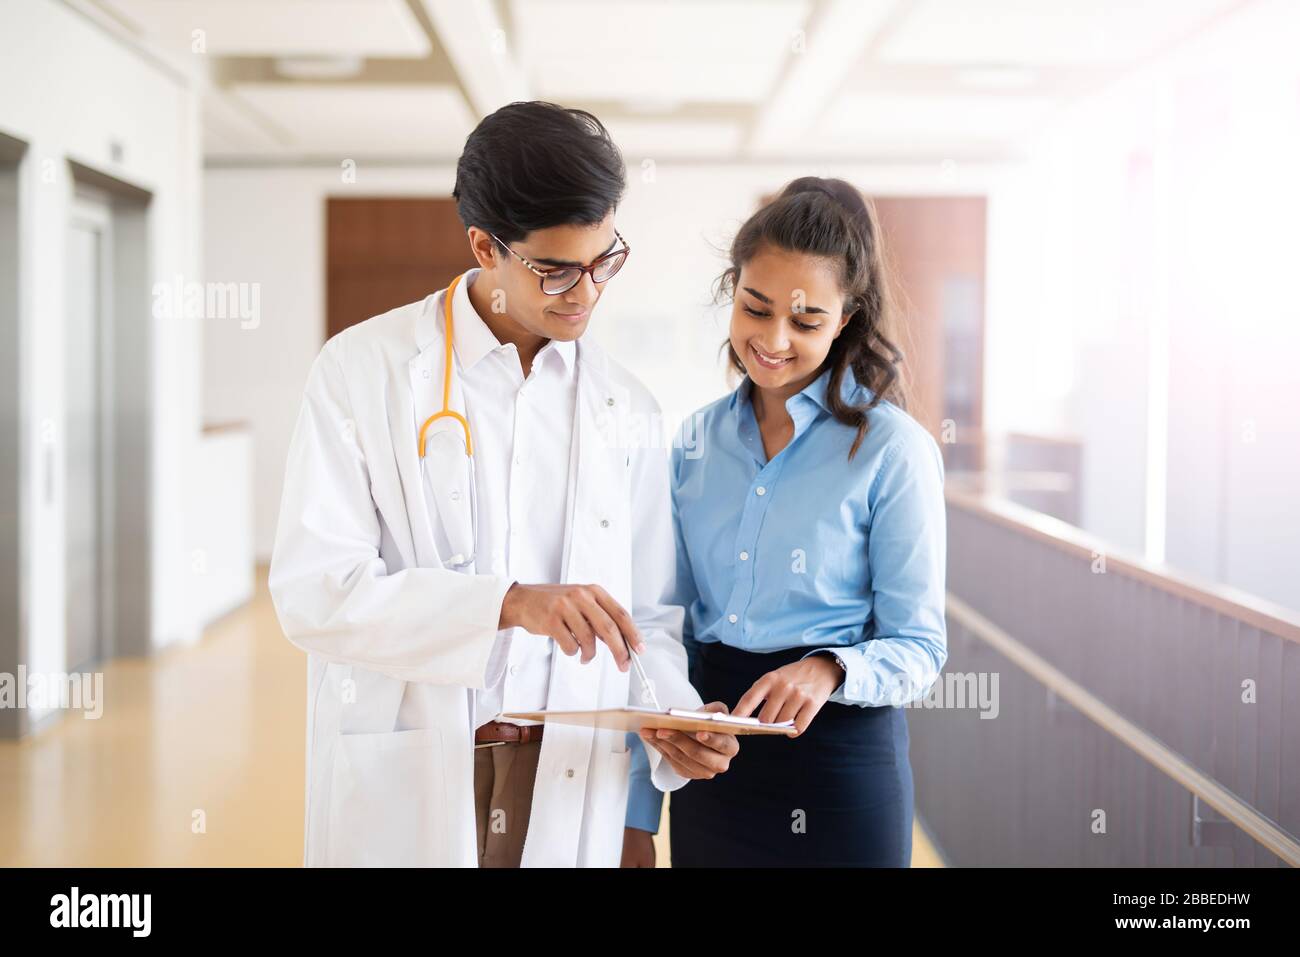 Two young doctors are discussing something in the hallway in a hospital Stock Photo